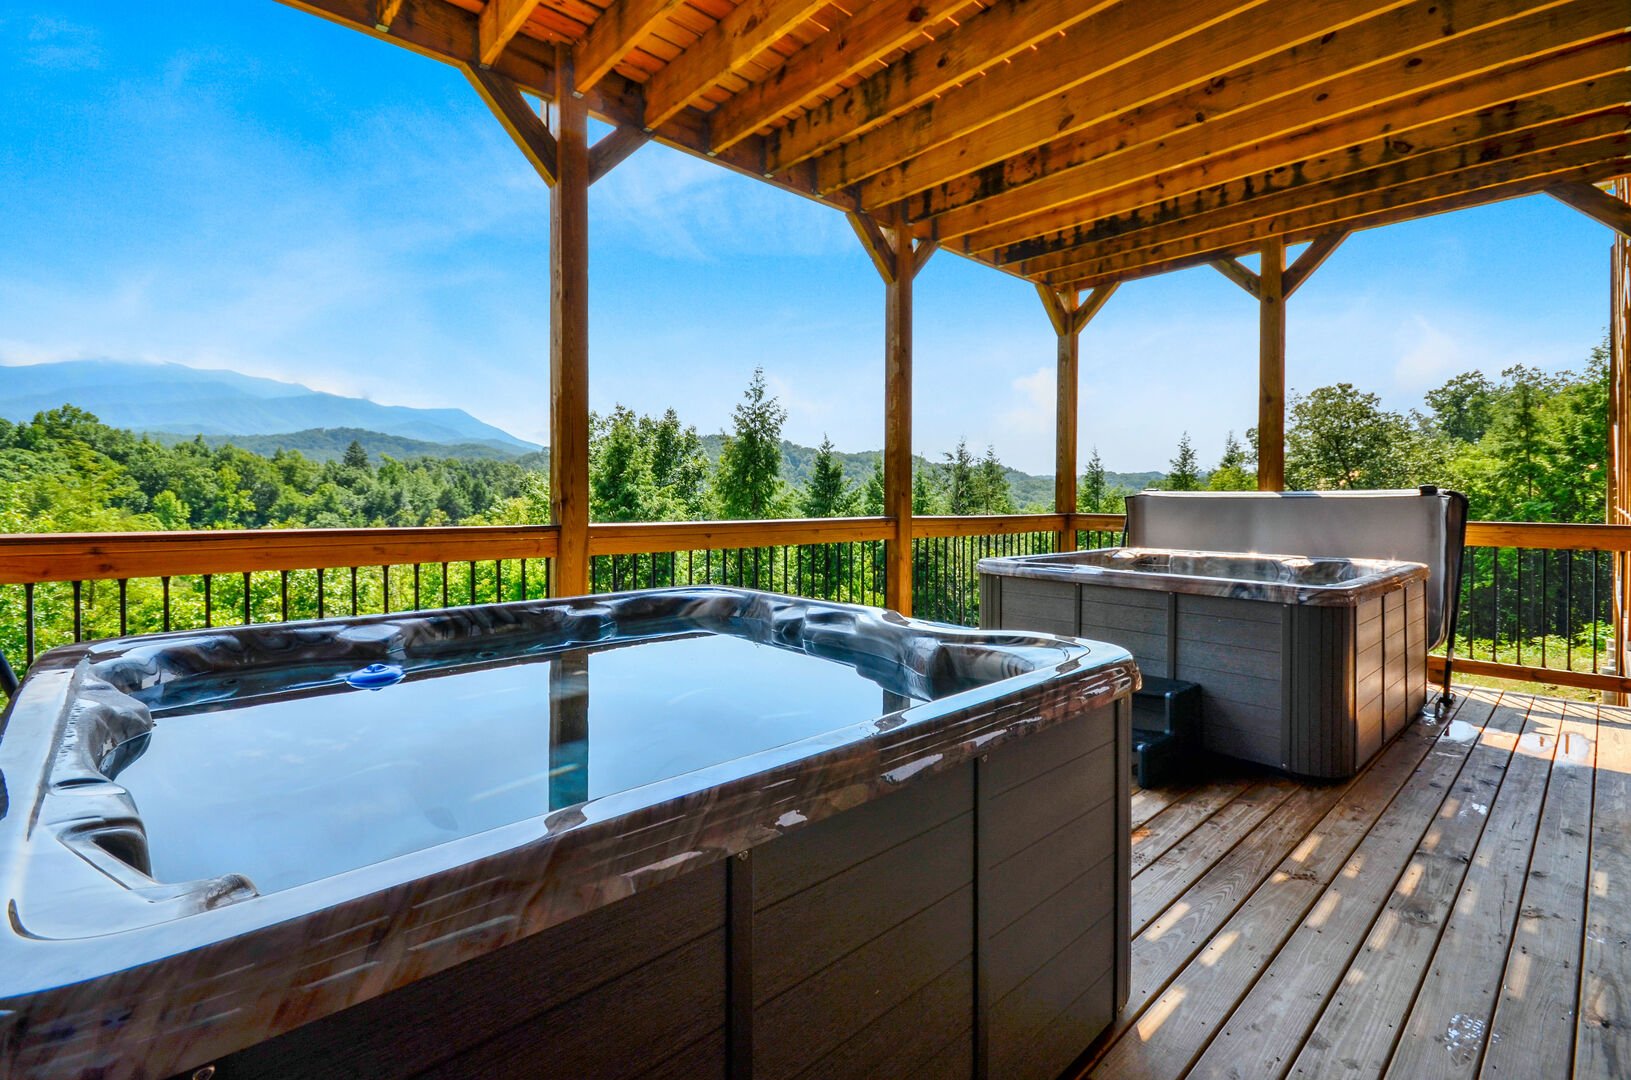 Two hot tubs on the balcony of this Vacation rental near Gatlinburg TN.